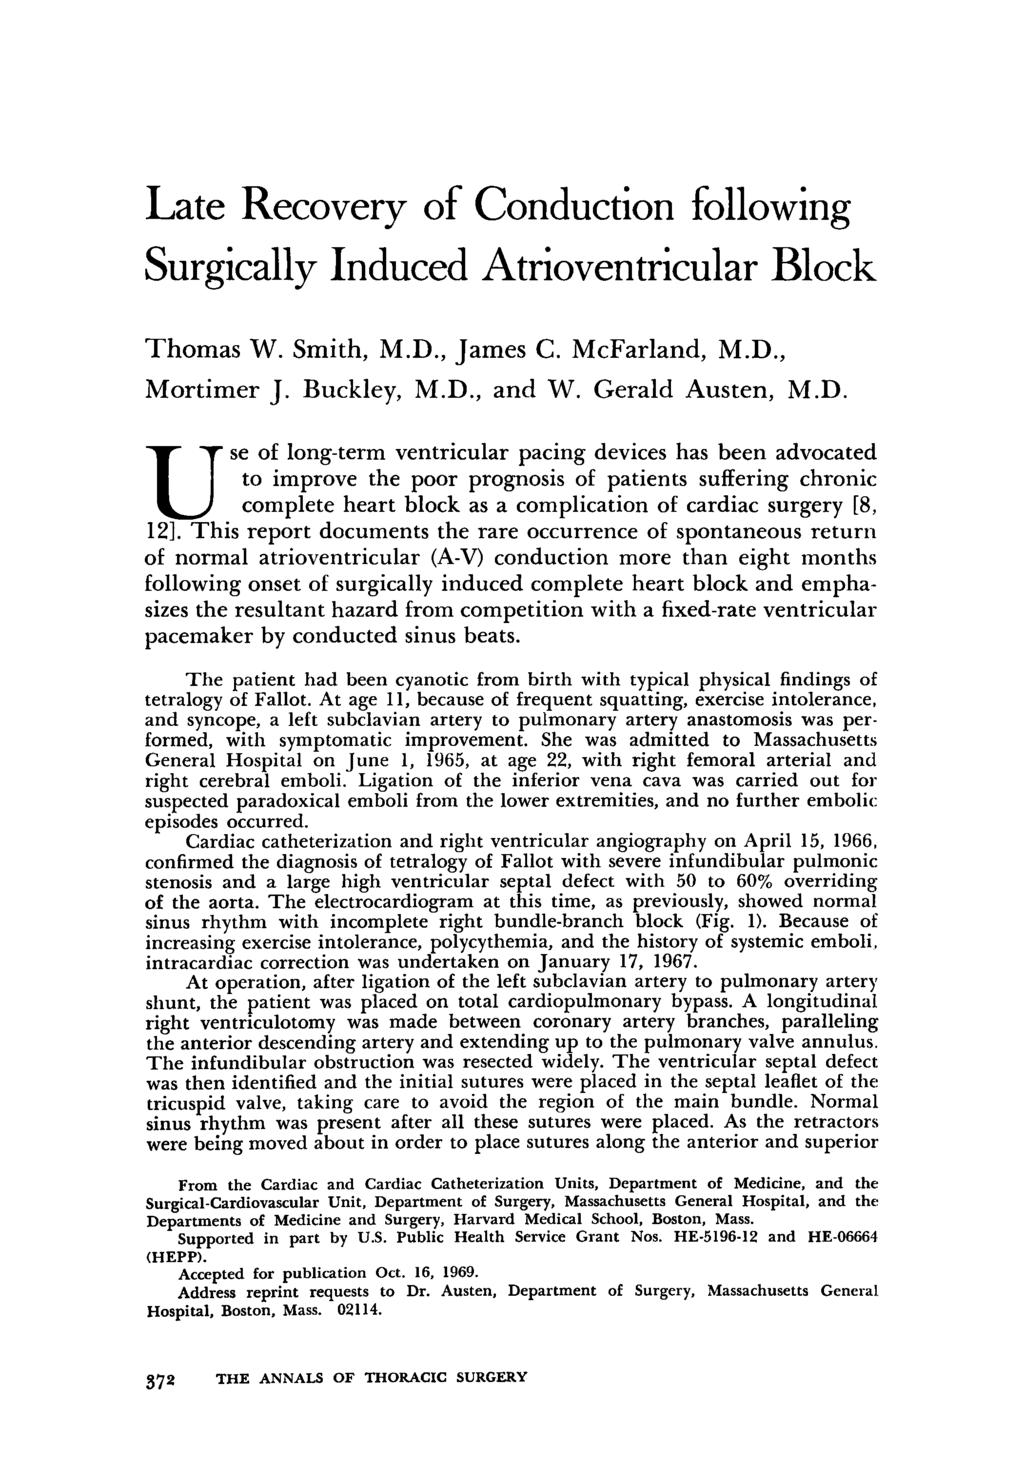 Late Recovery of Conduction following Surgically Induced Atrioventricular Block Thomas W. Smith, M.D.